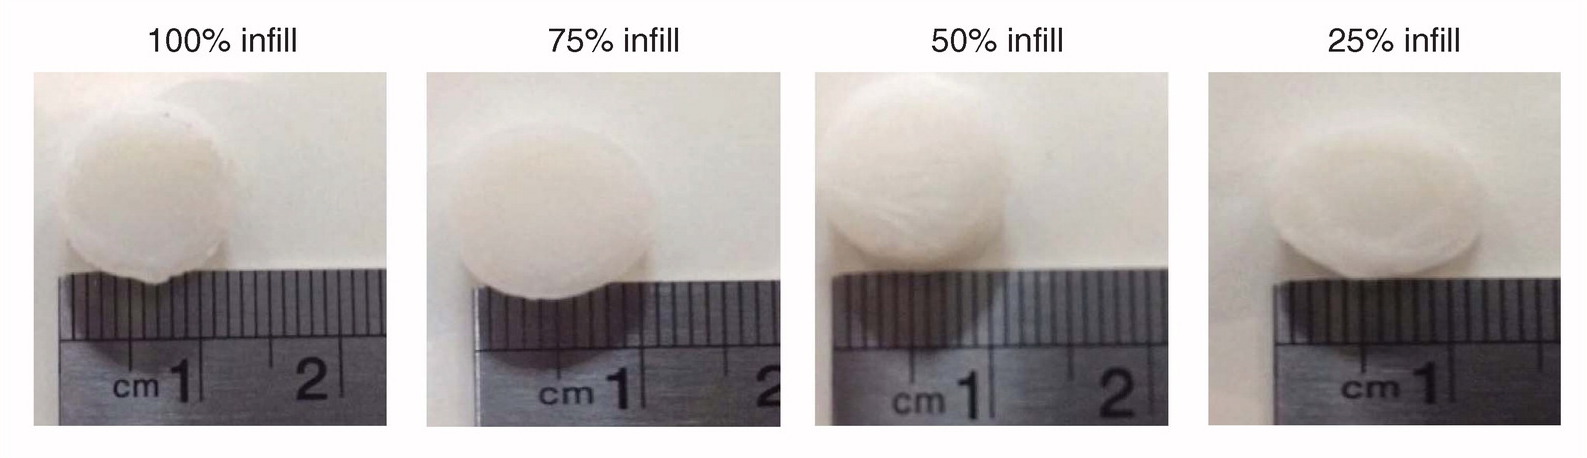 The Pakistani researchers used FDM 3D printing to create tablets with different percentages of infill (pictured). Photo via the Future Medicine journal.